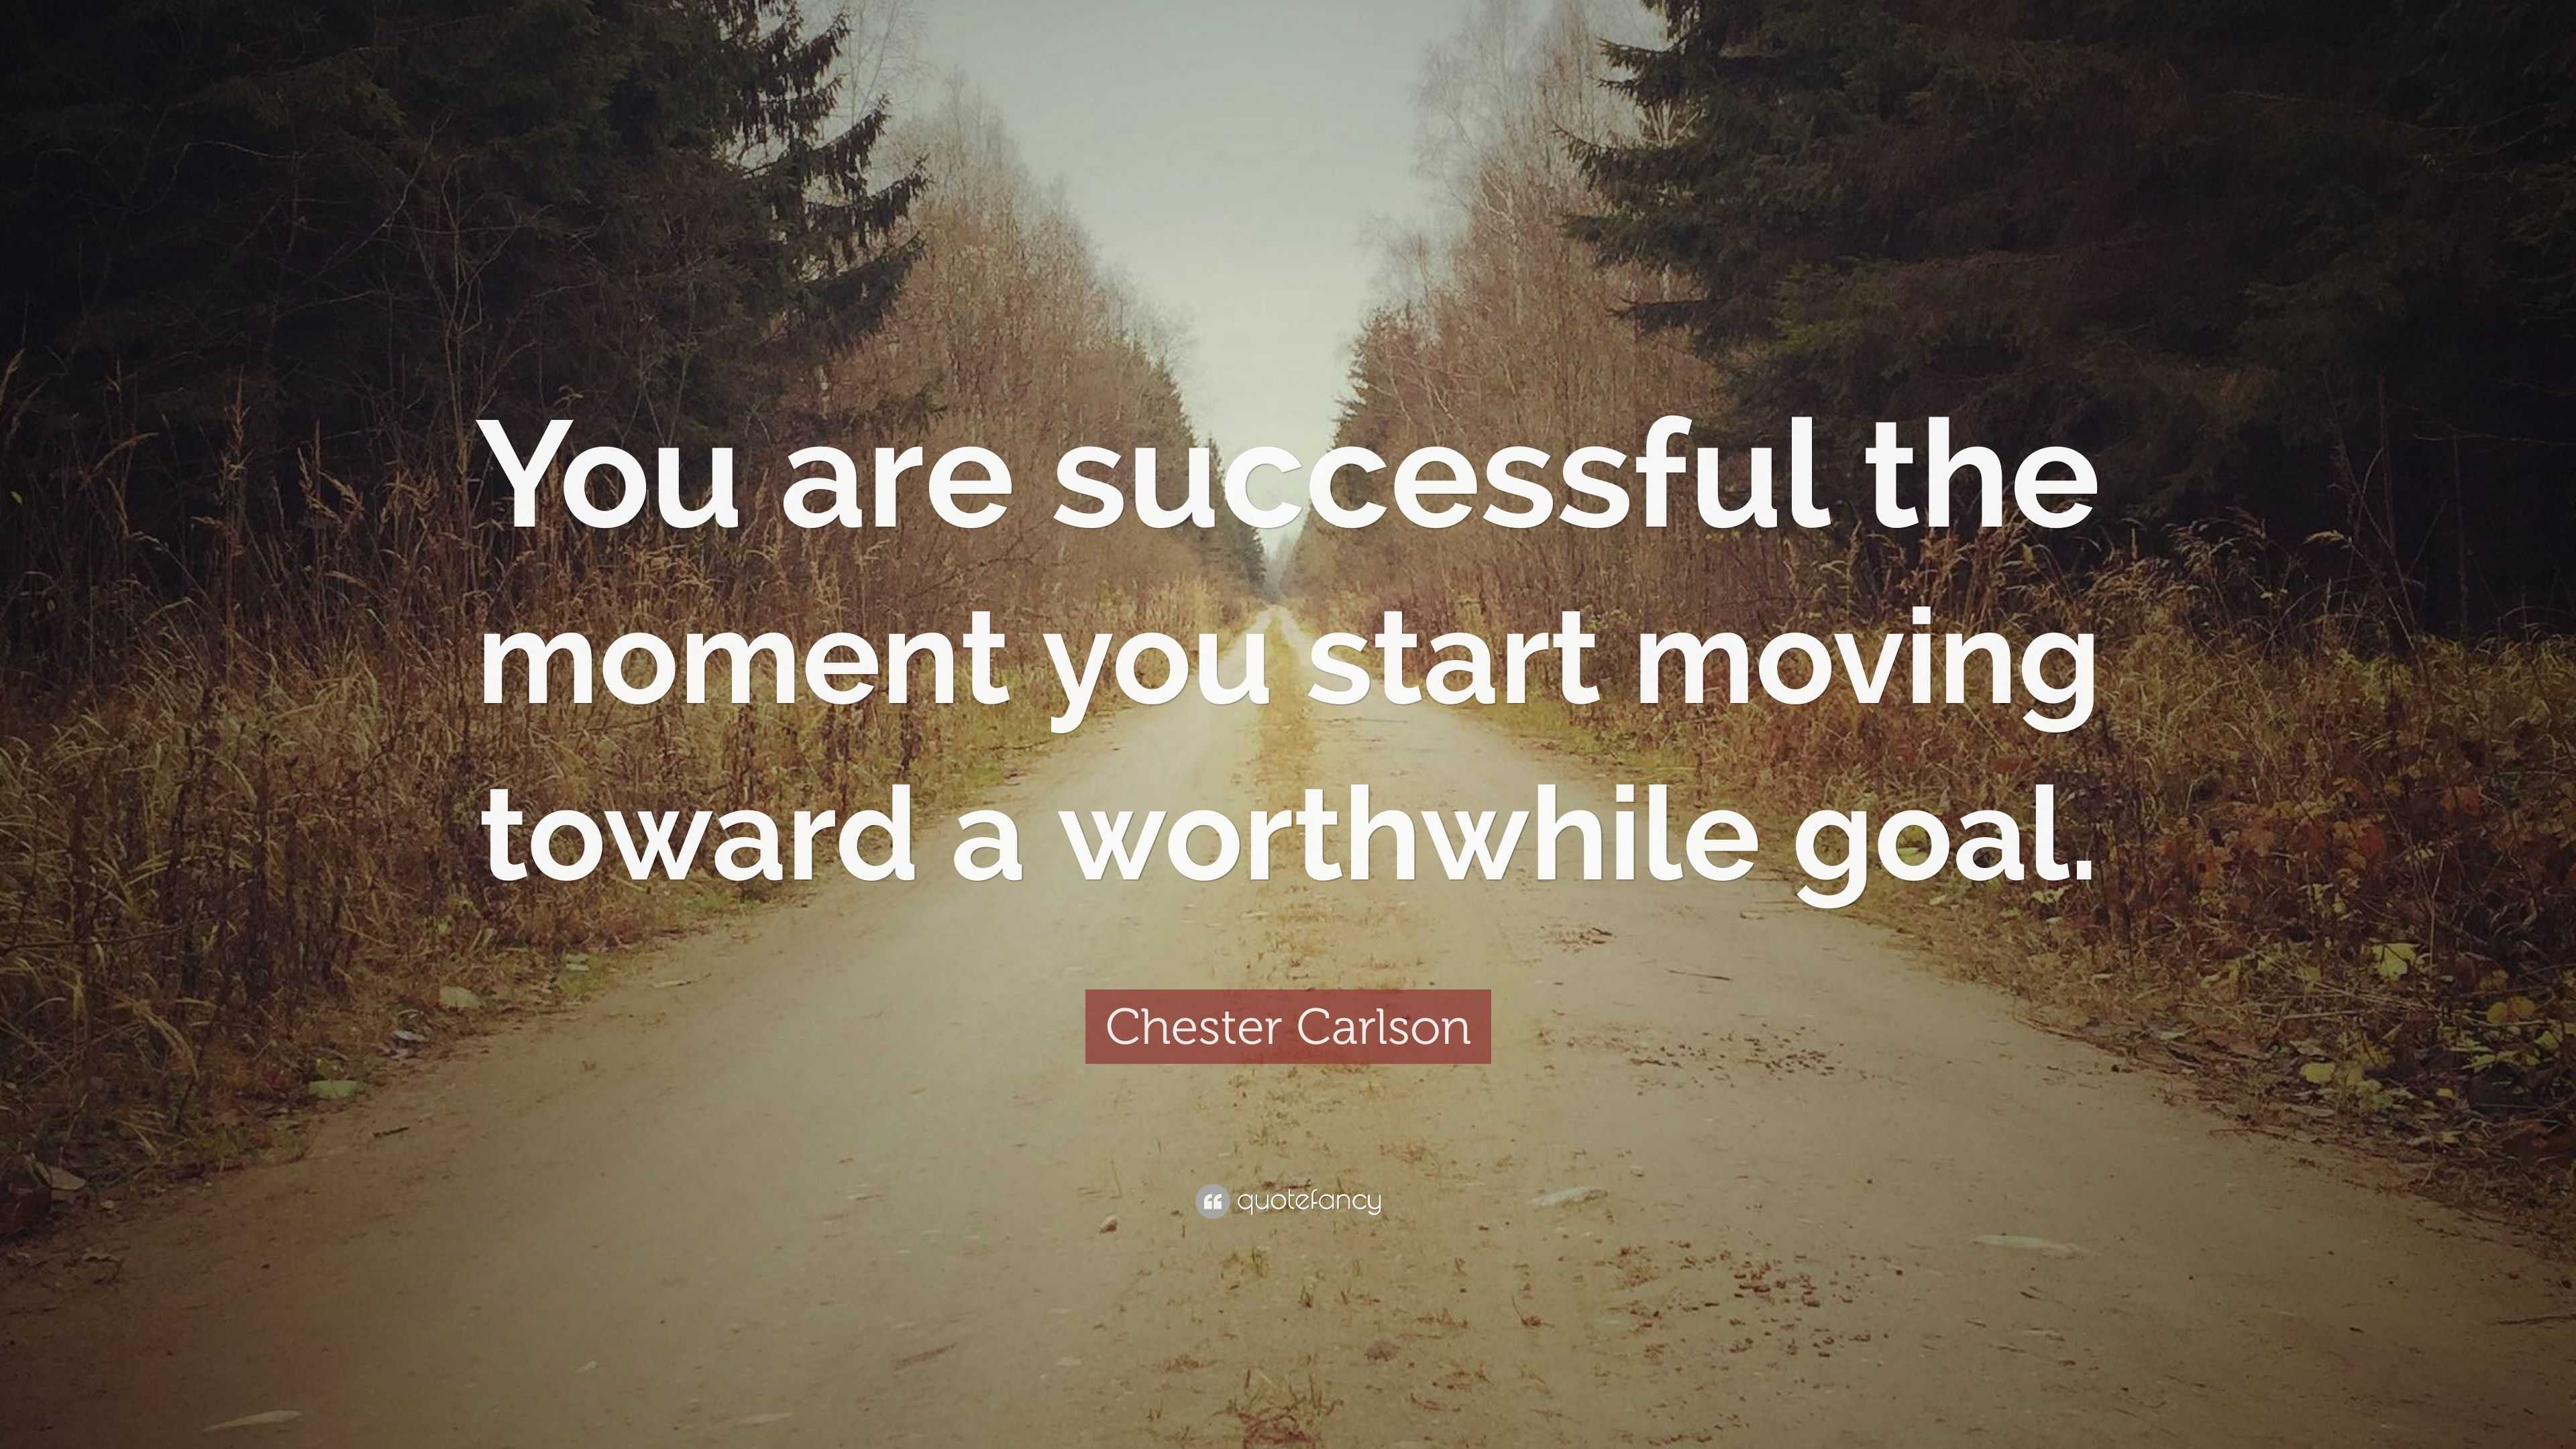 Chester Carlson Quote: “You are successful the moment you start moving ...